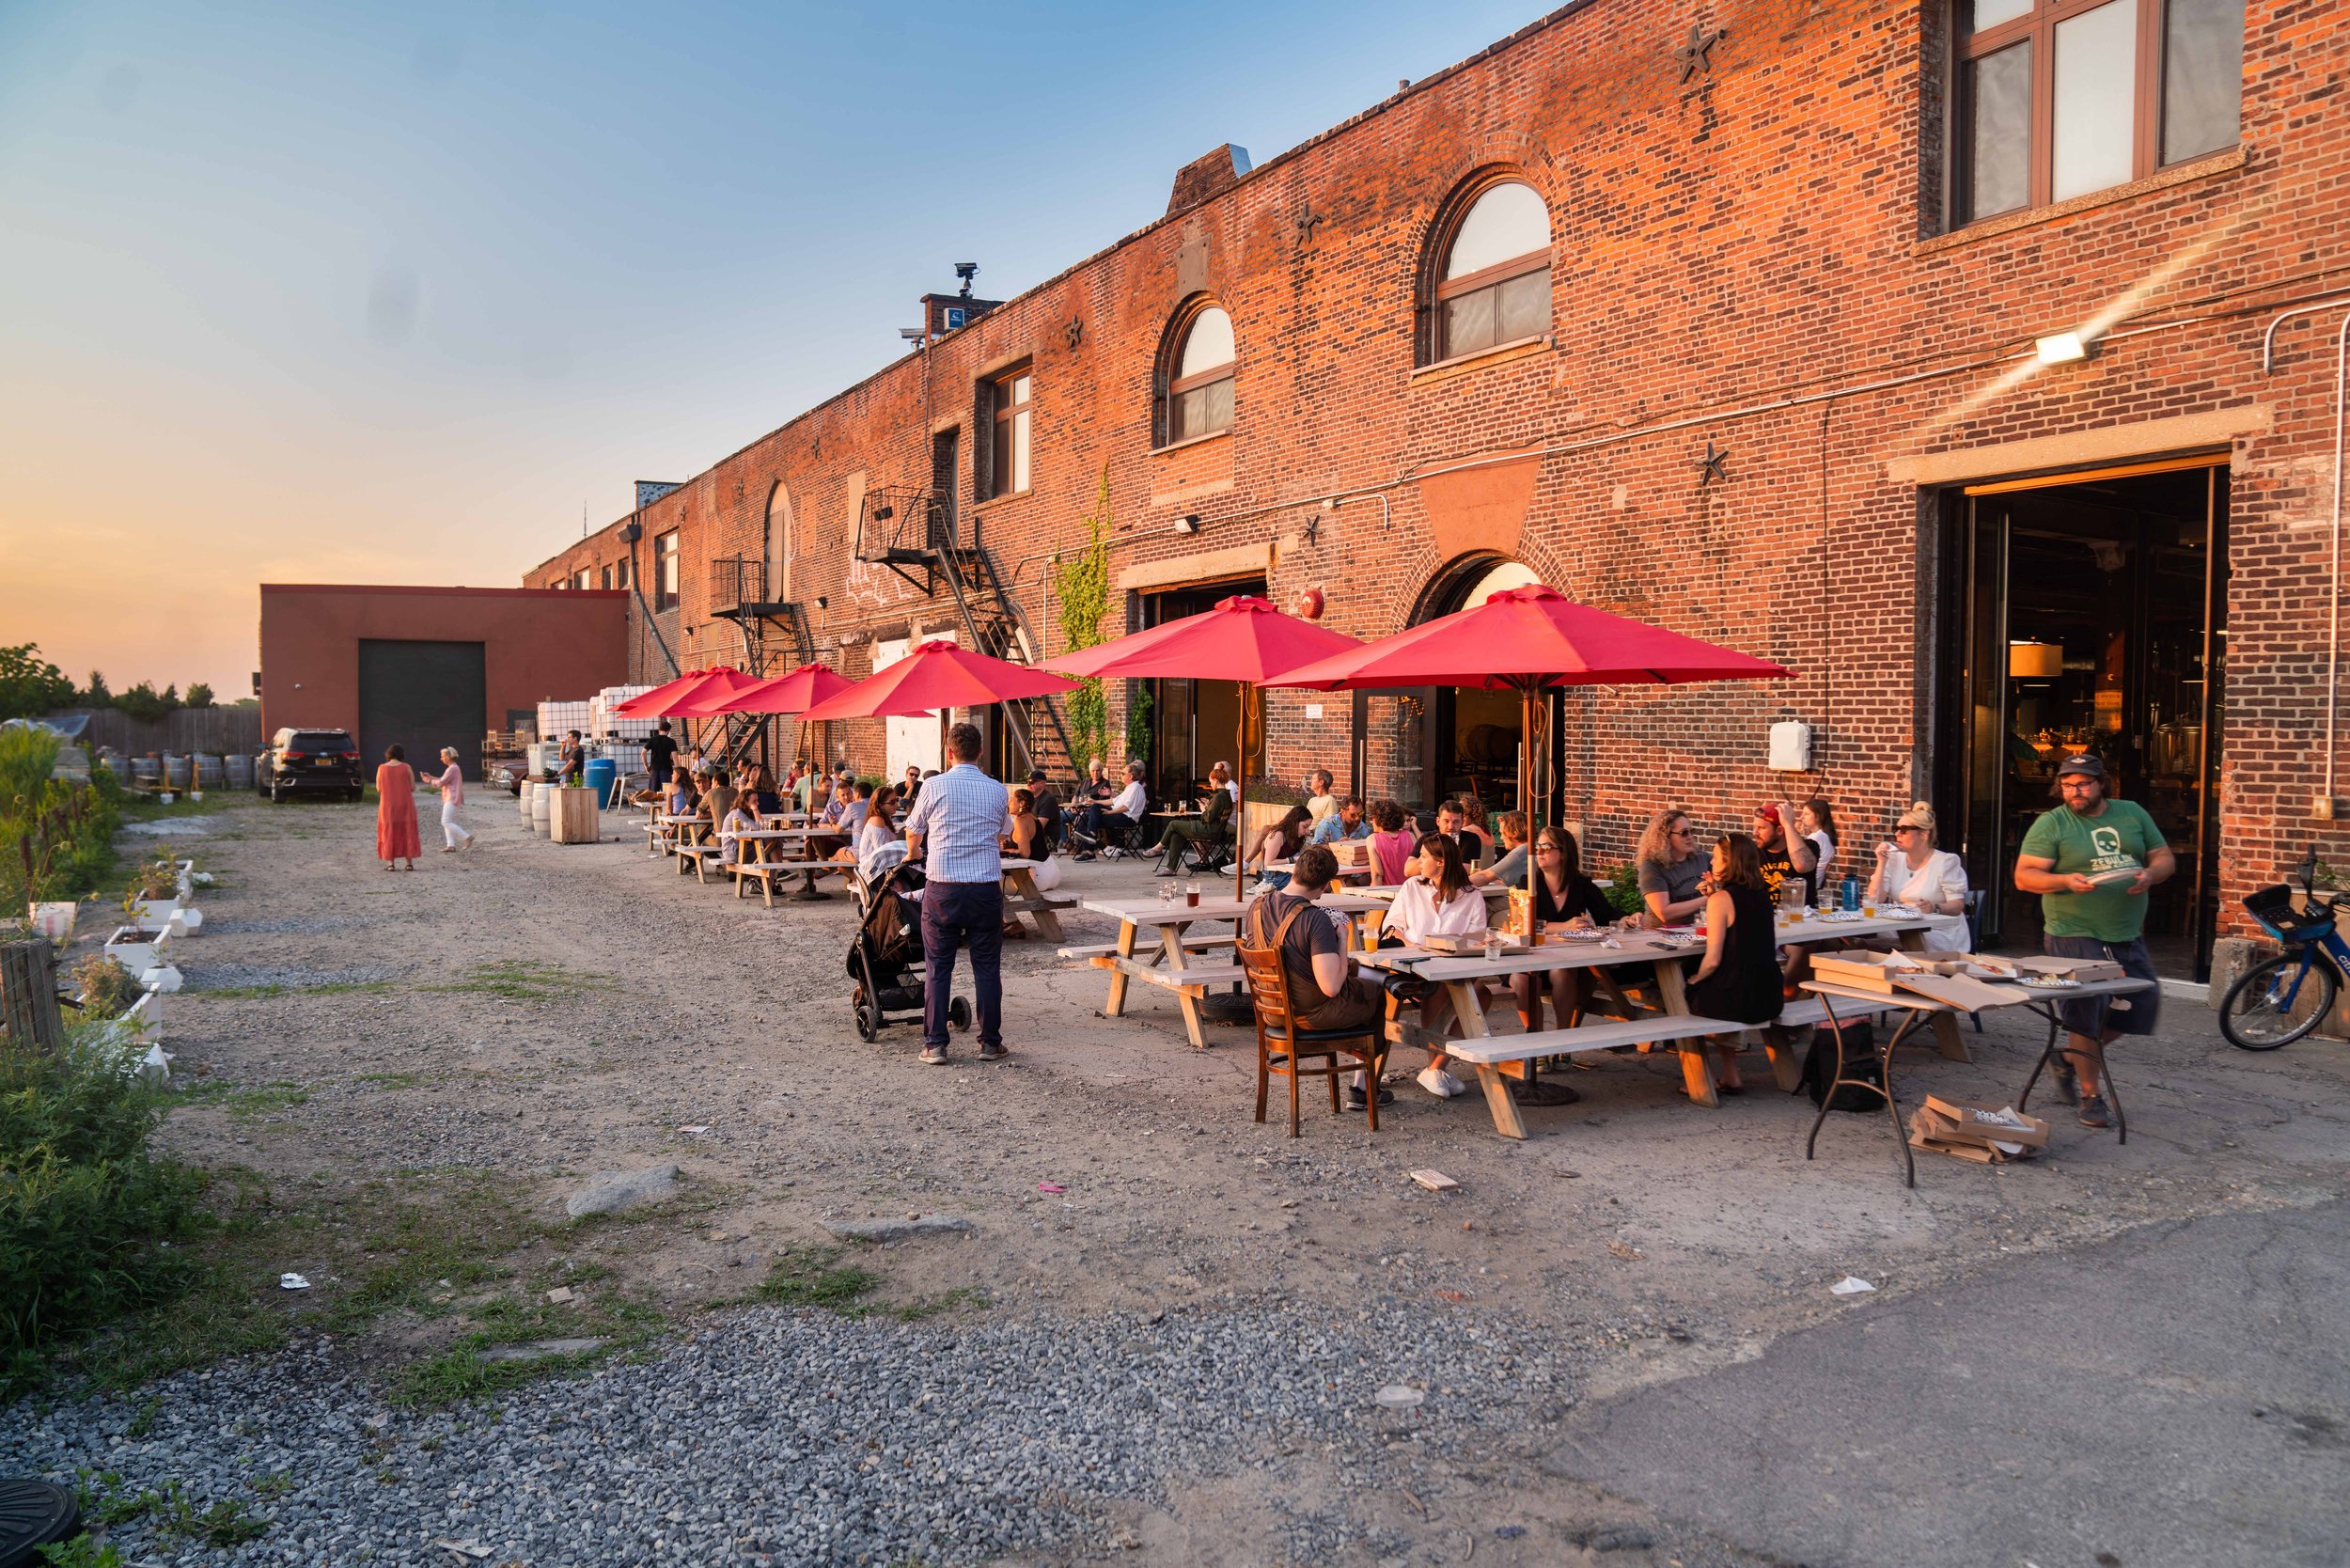 Red Hook — Strong Rope Brewery